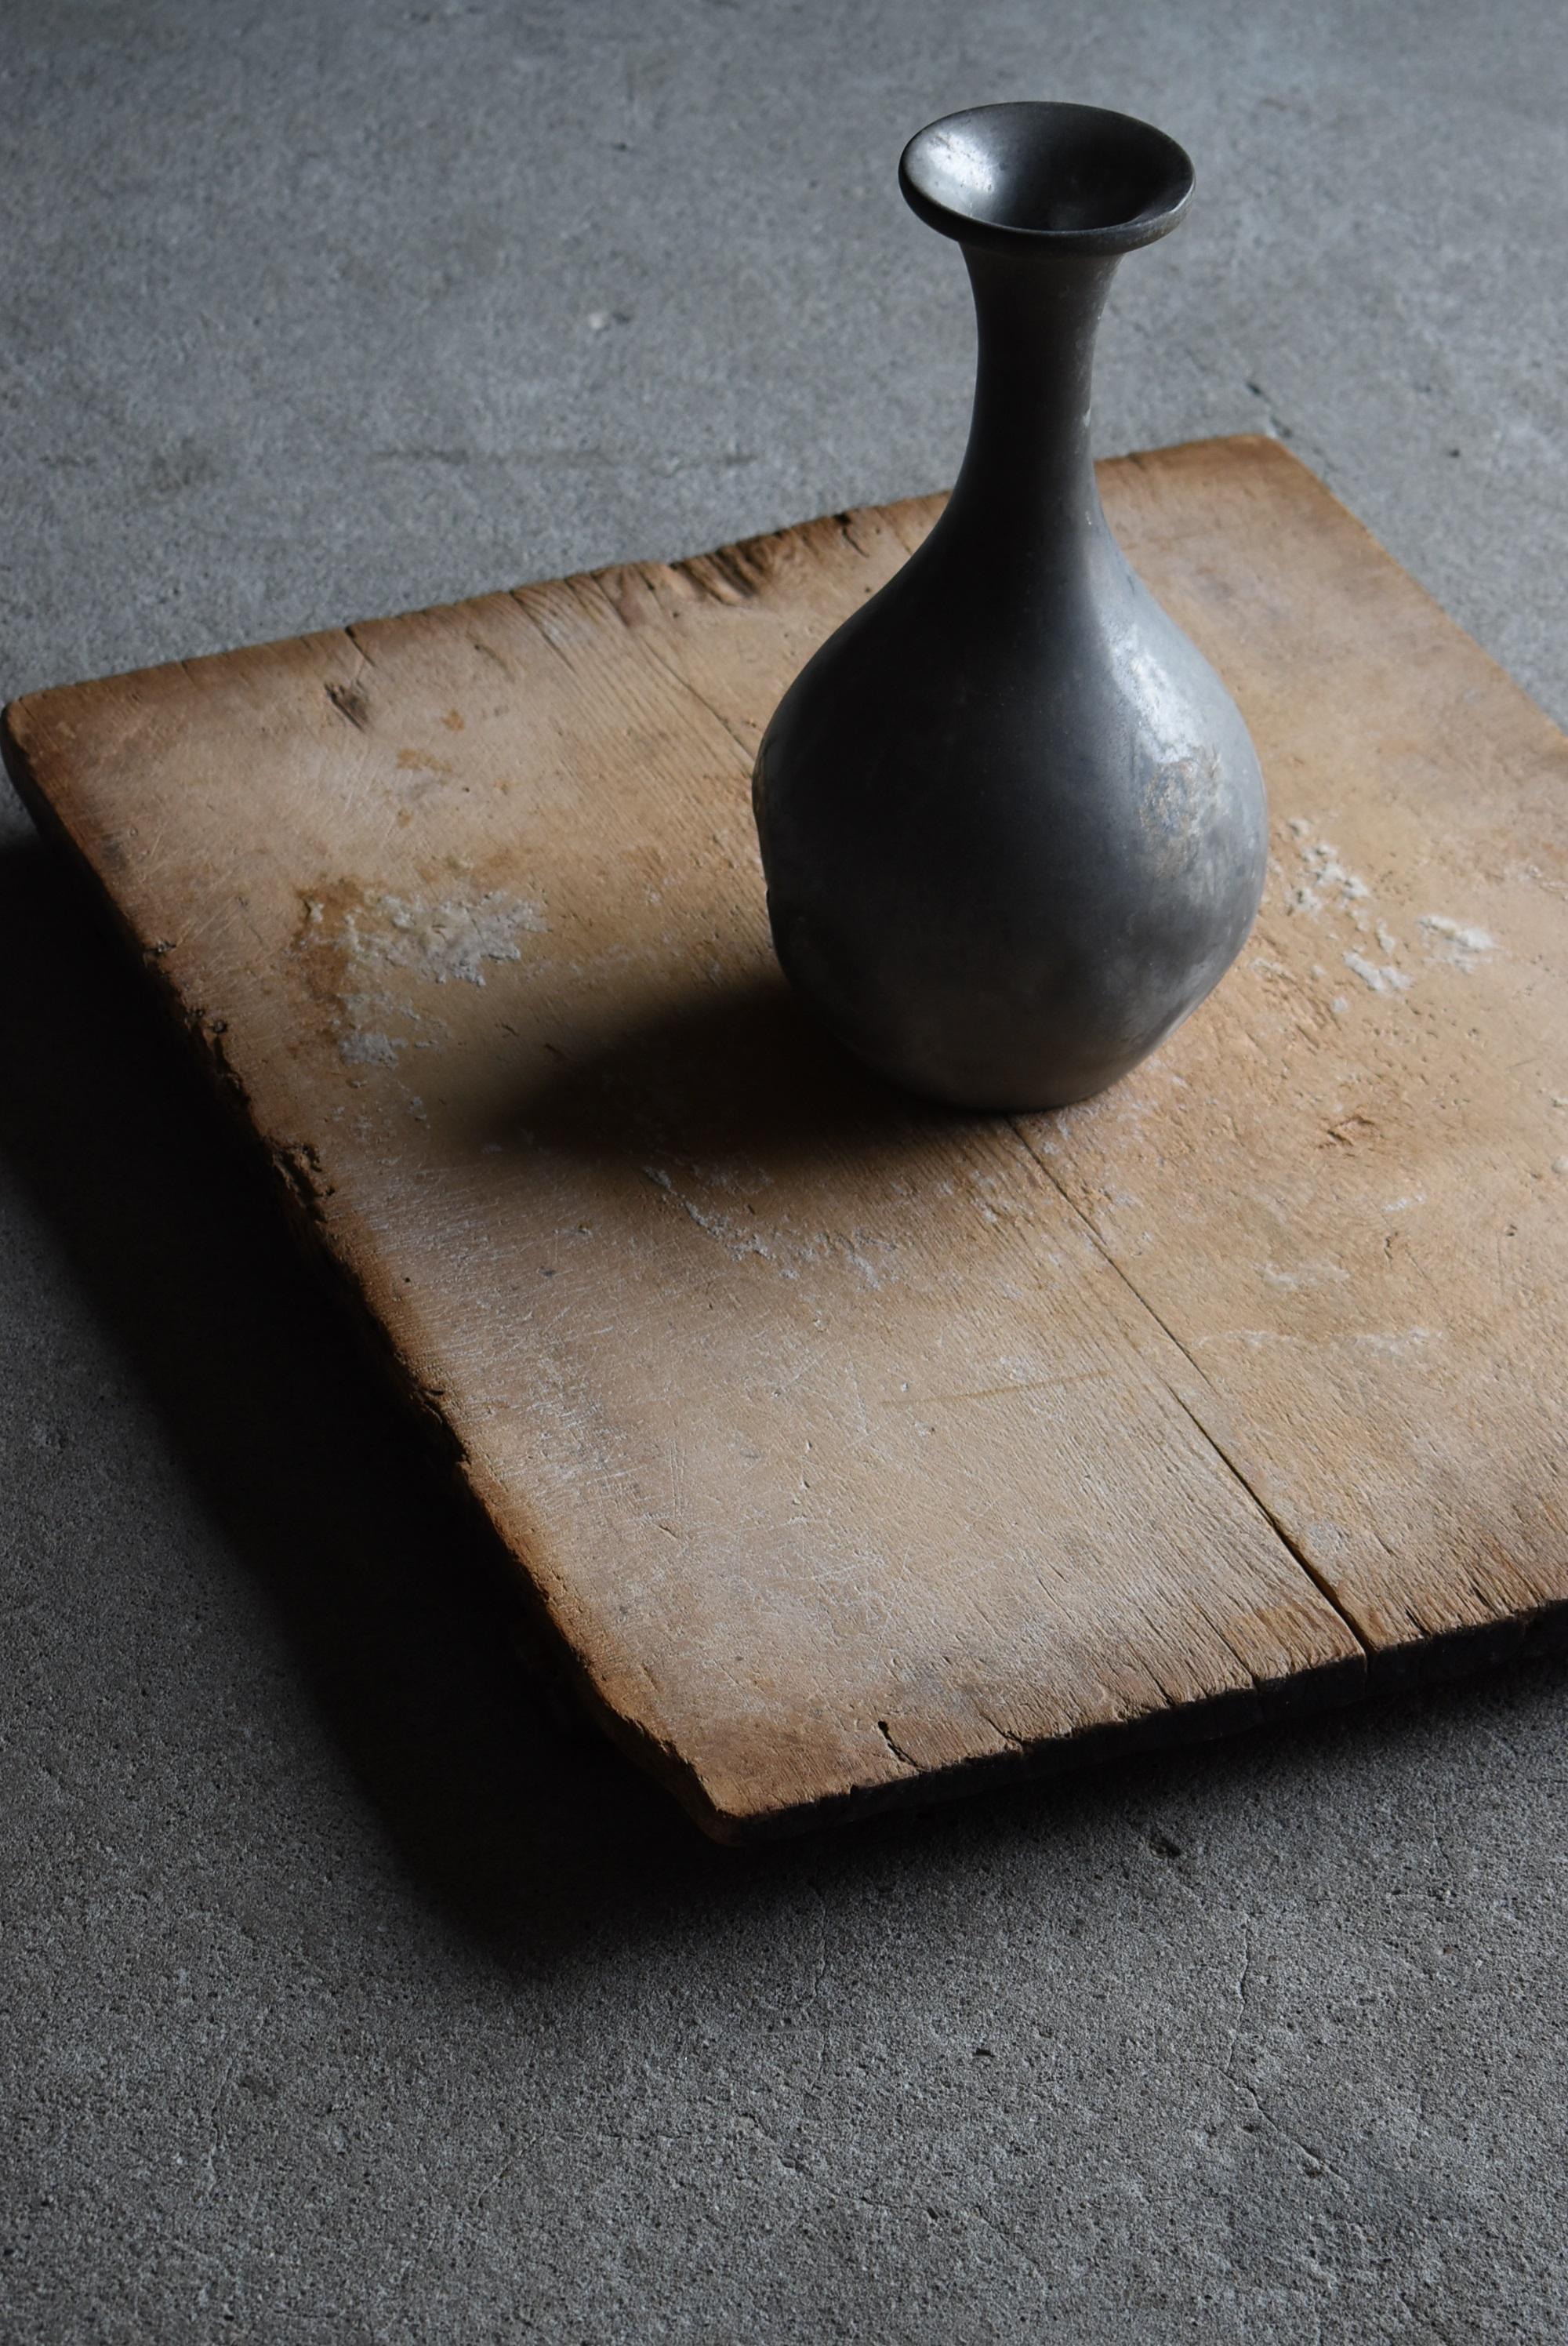 Japanese Antique Wooden Board 1800s-1900s/Abstract Art Working Table Wabisabi 10